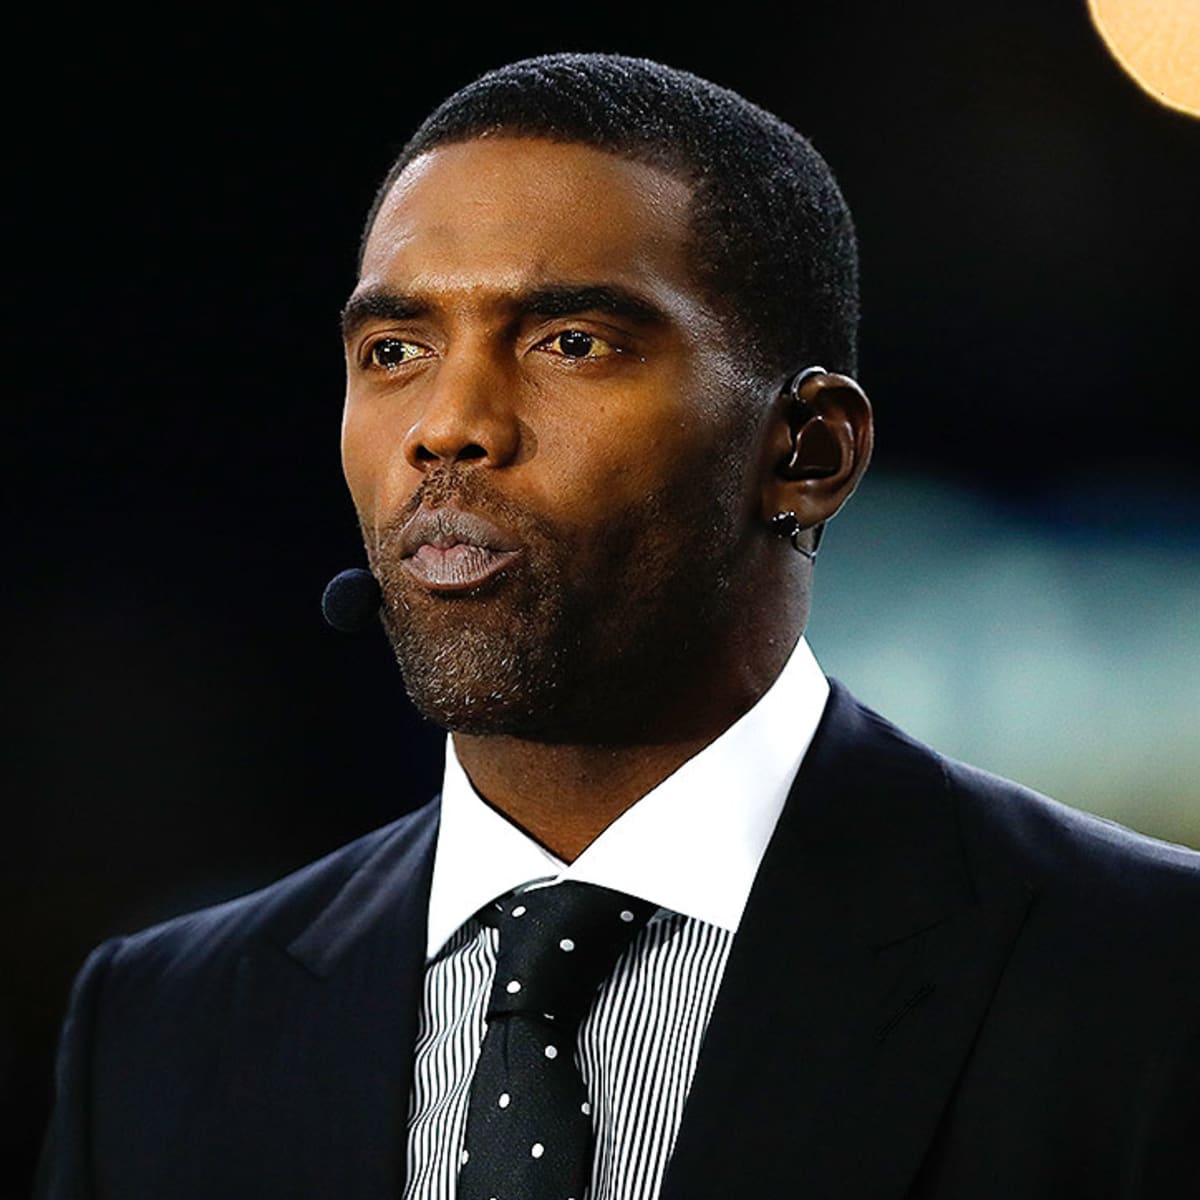 Randy Moss still has NFL on his mind even in retirement - Sports